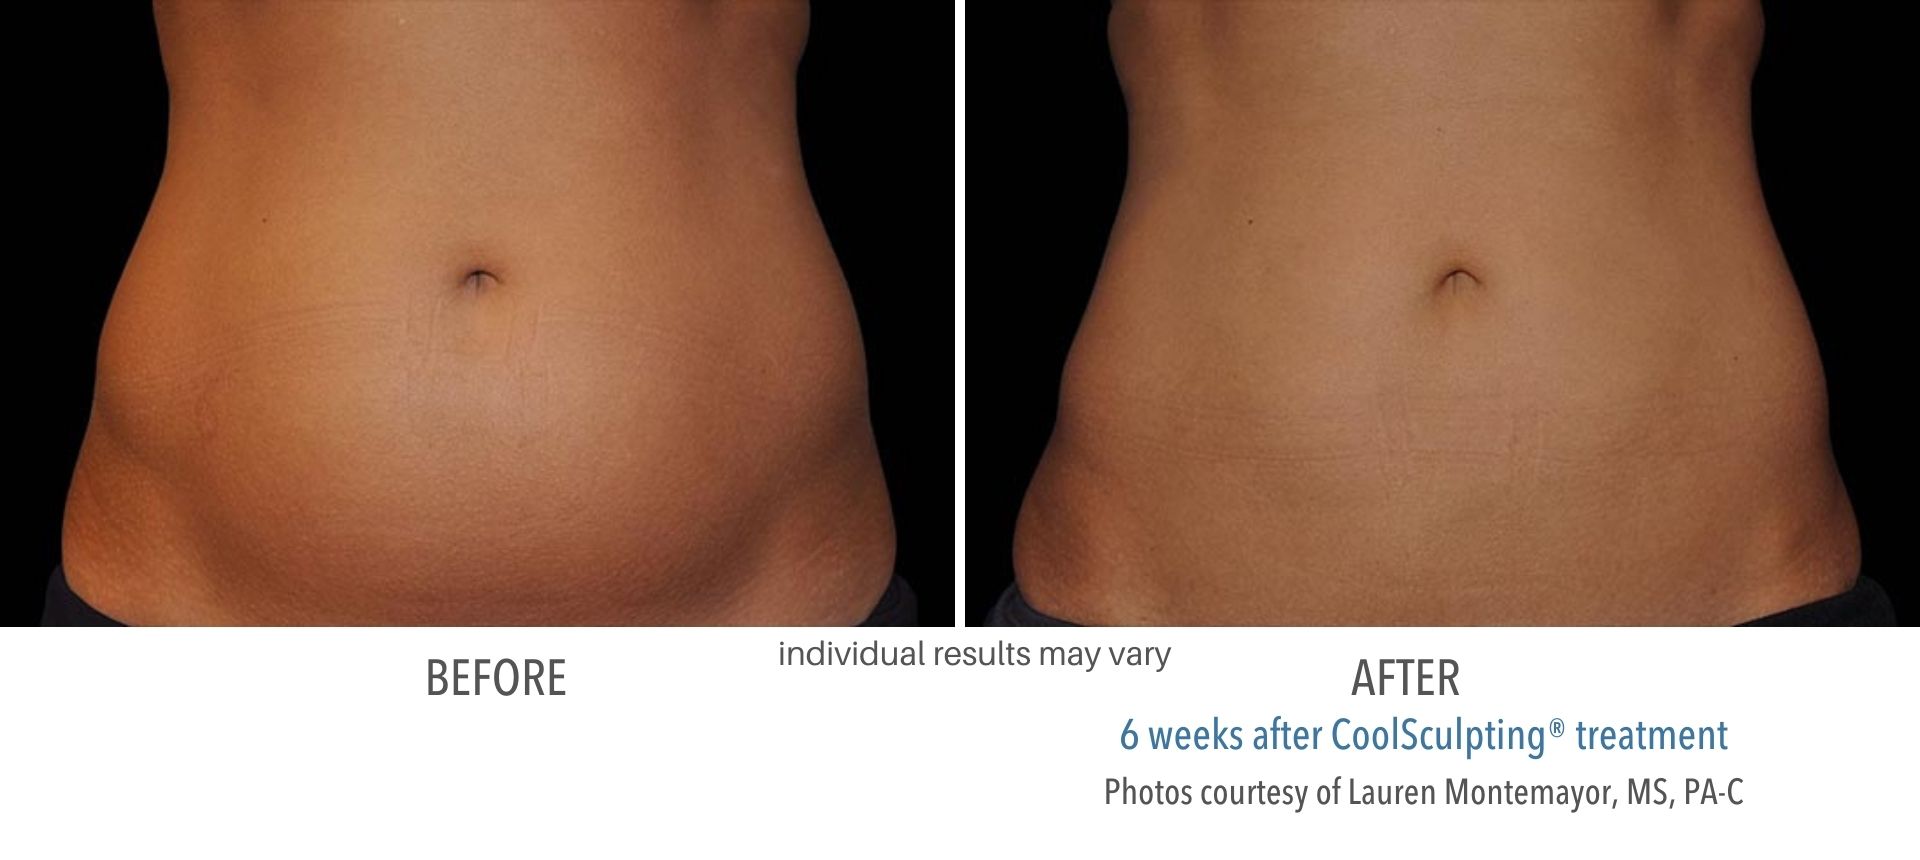 Absomen before and after CoolSculpting treatment at Haus of Aesthetics.